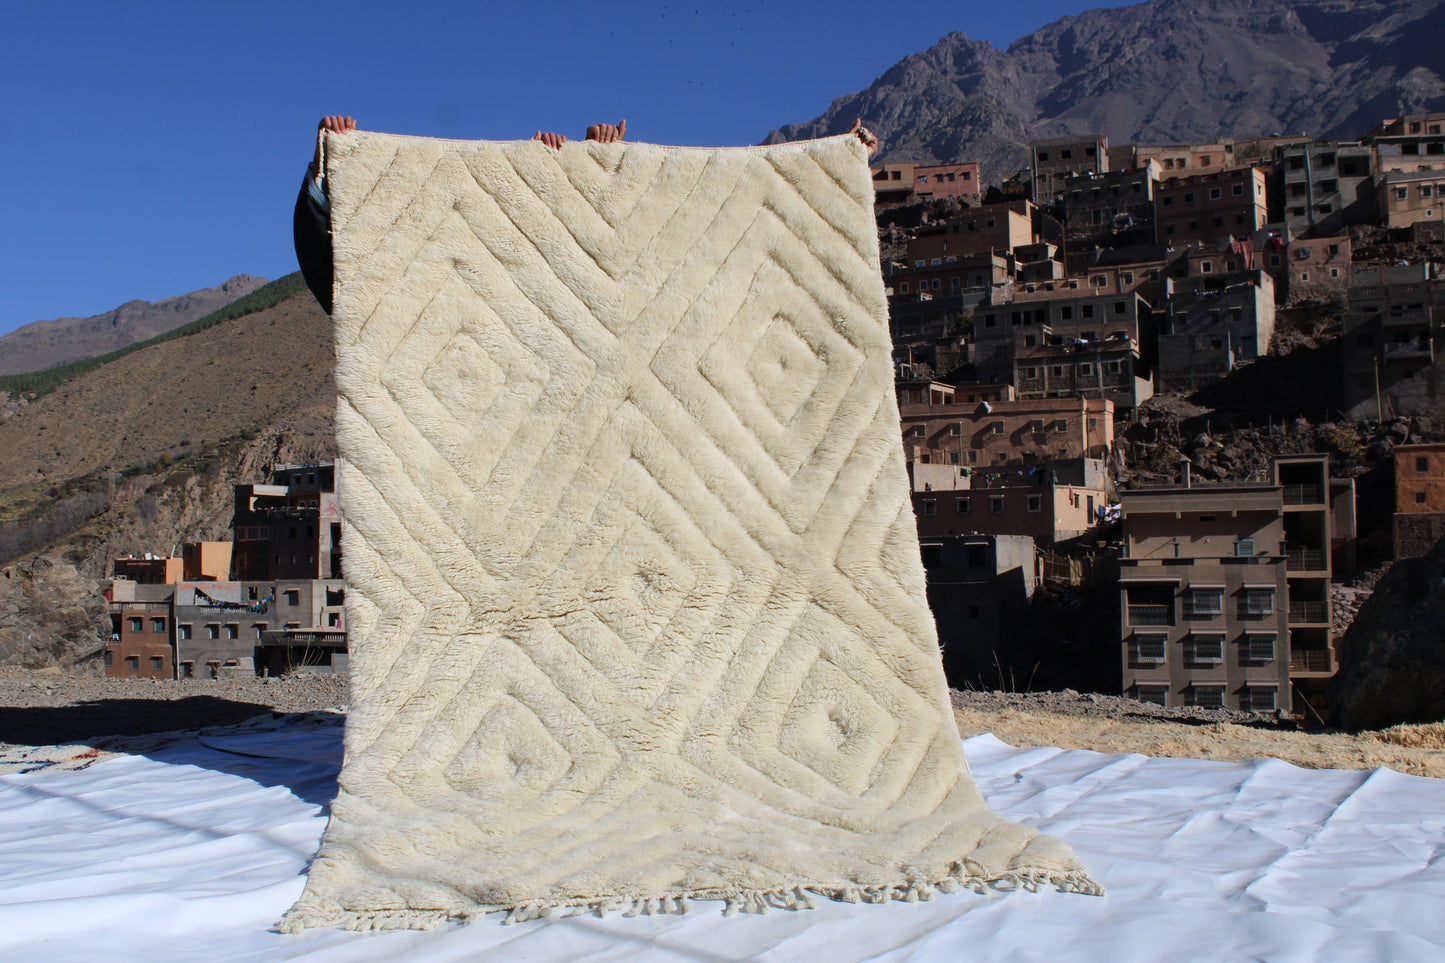 Beni Ourain rugs originate from the Atlas Mountains of Morocco and are characterized by their distinctive, neutral-toned, and geometric designs. These handwoven rugs often feature a plush pile and are made by the Berber tribes,  size is 260x150 cm